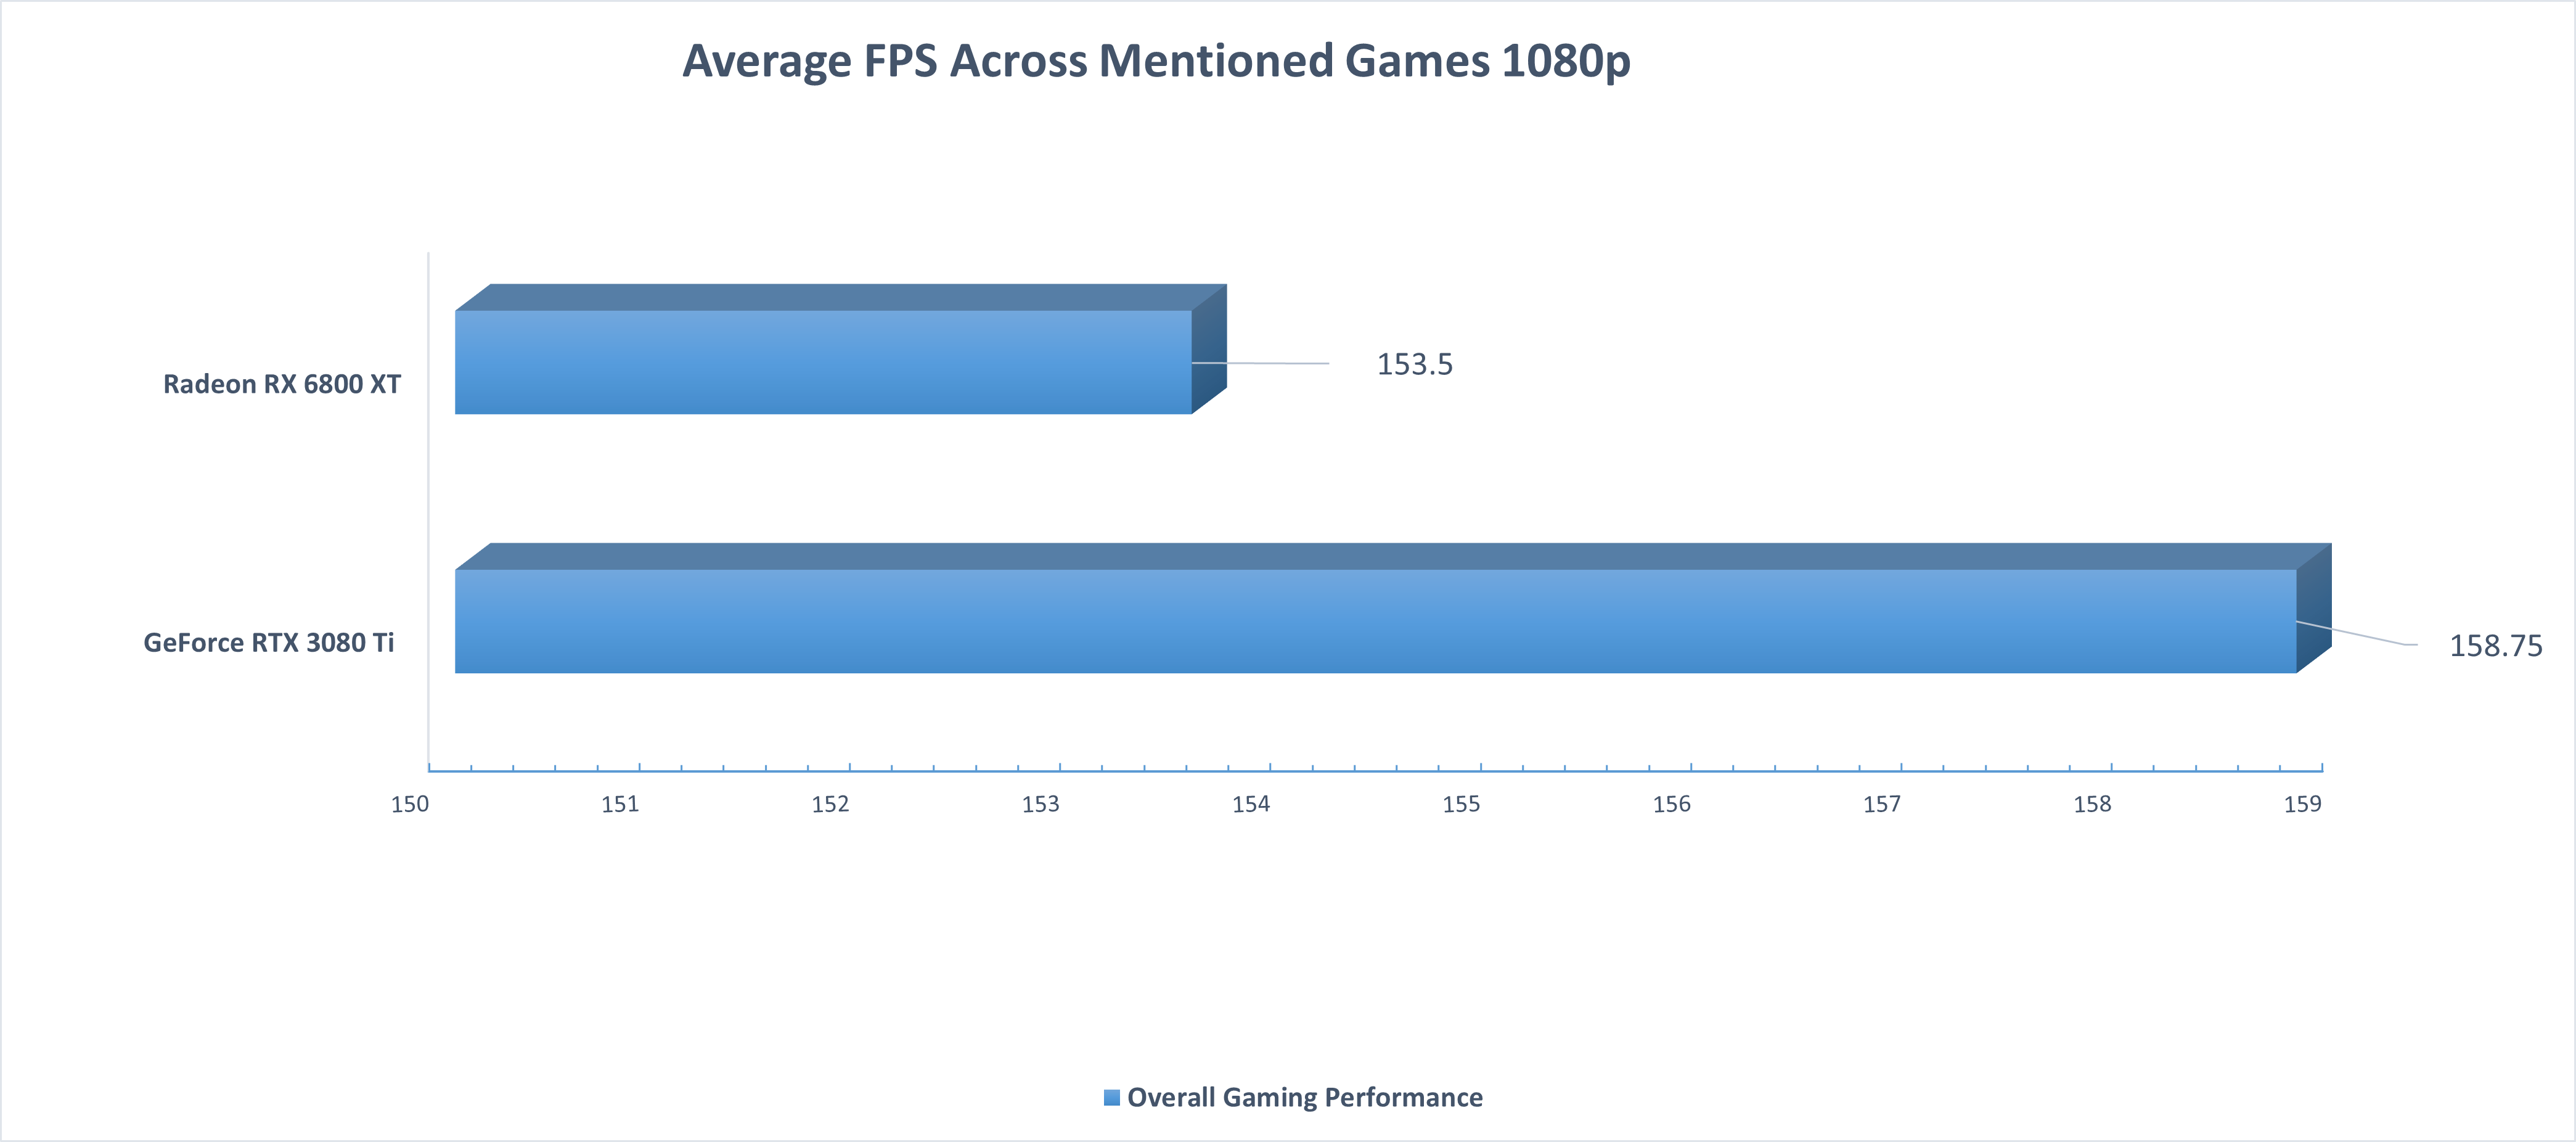 Average FPS Performance Across Mentioned Games